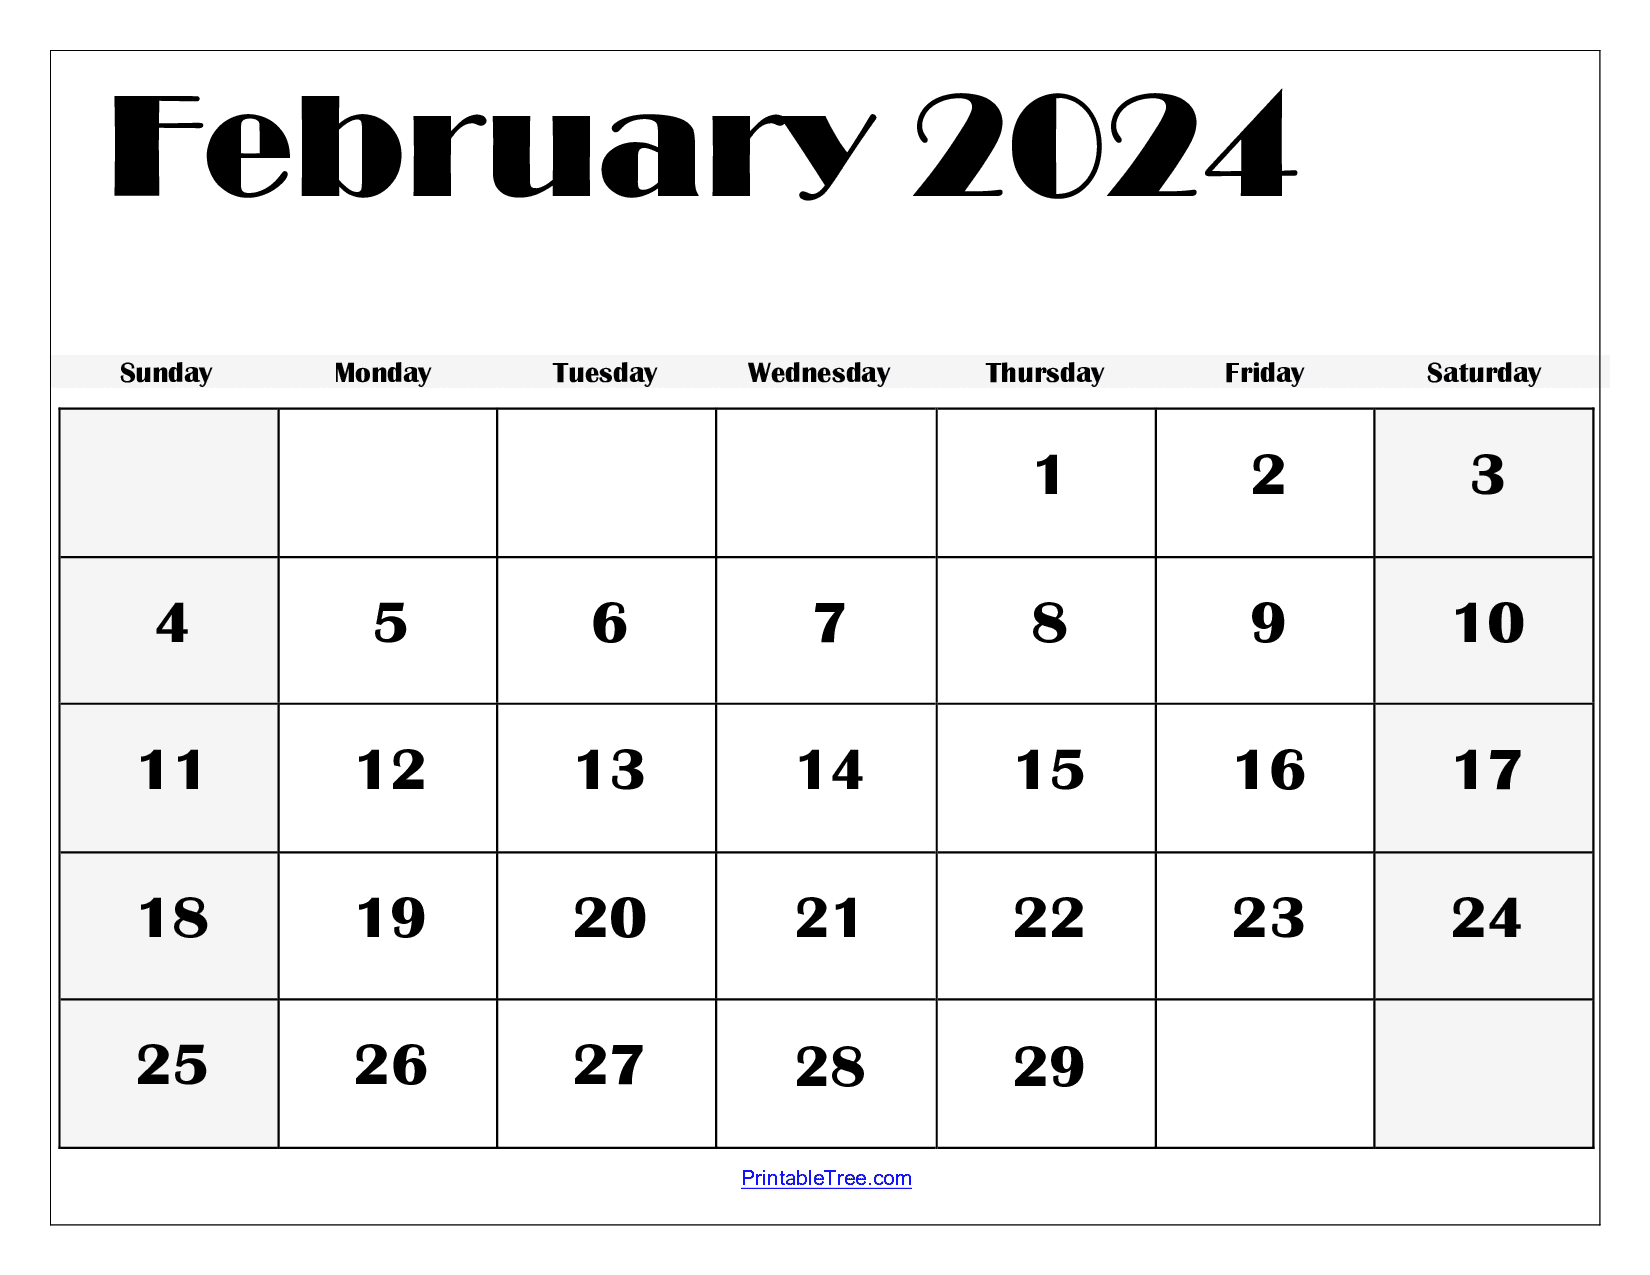 February 2024 Calendar Printable Pdf Template With Holidays for Free Printable February 2024 Monthly Calendar With Holidays